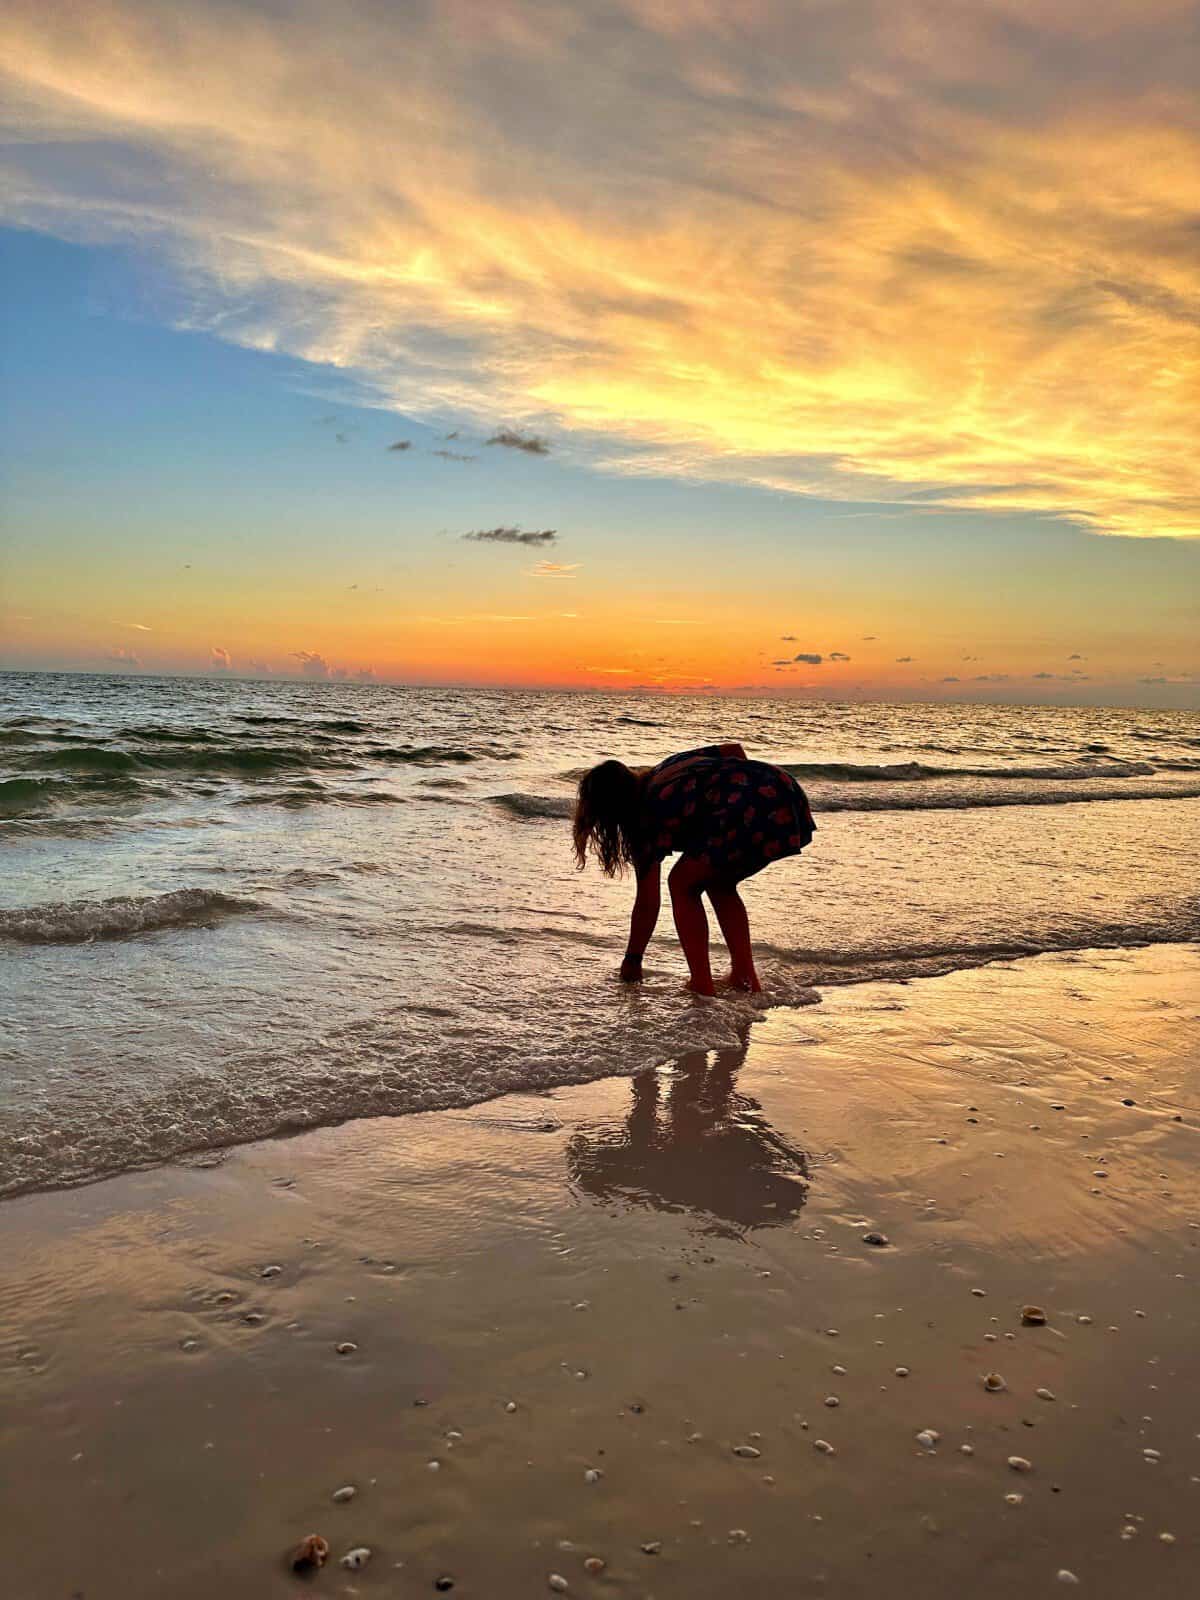 Marco Island is known for its sunsets, and the ones at JW Marriott Marco Island are amazing - silhouette of woman picking up shell beach at sunset